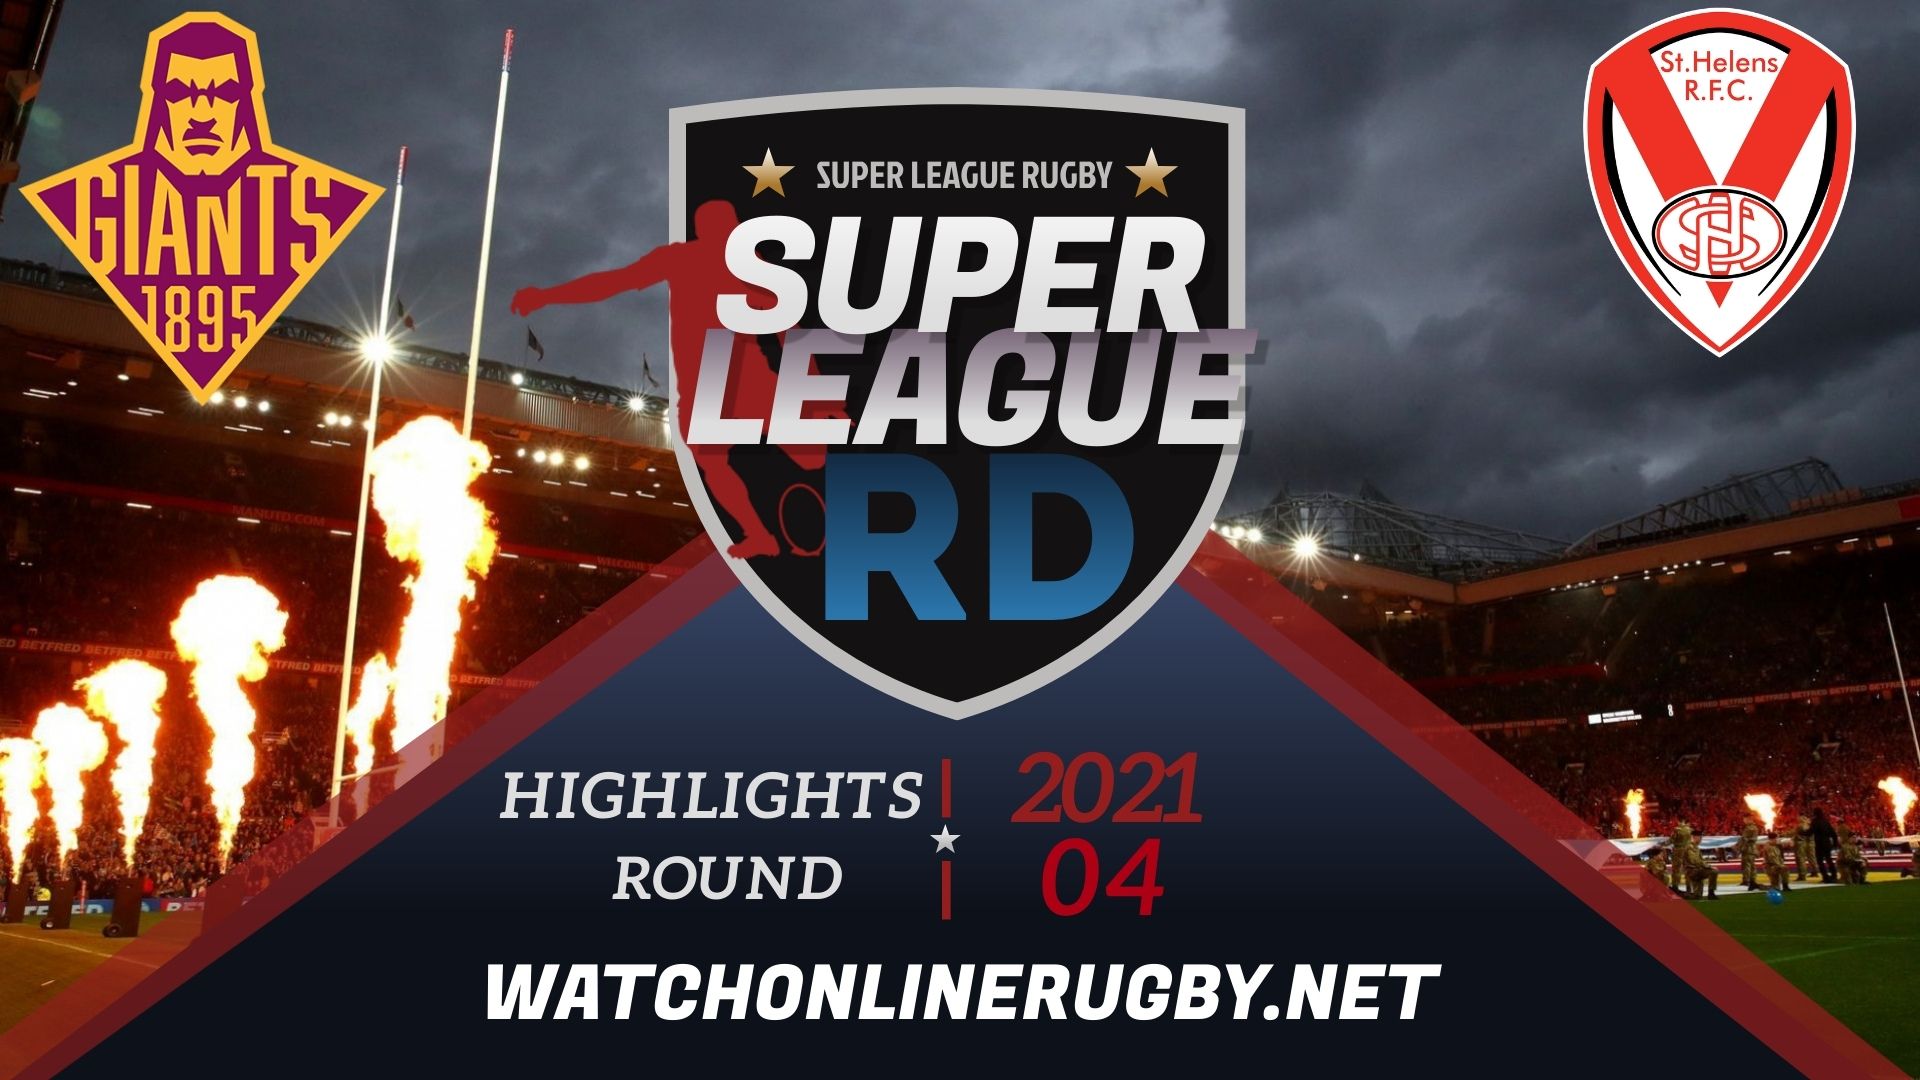 Huddersfield Giants Vs St Helens Super League Rugby 2021 RD 4